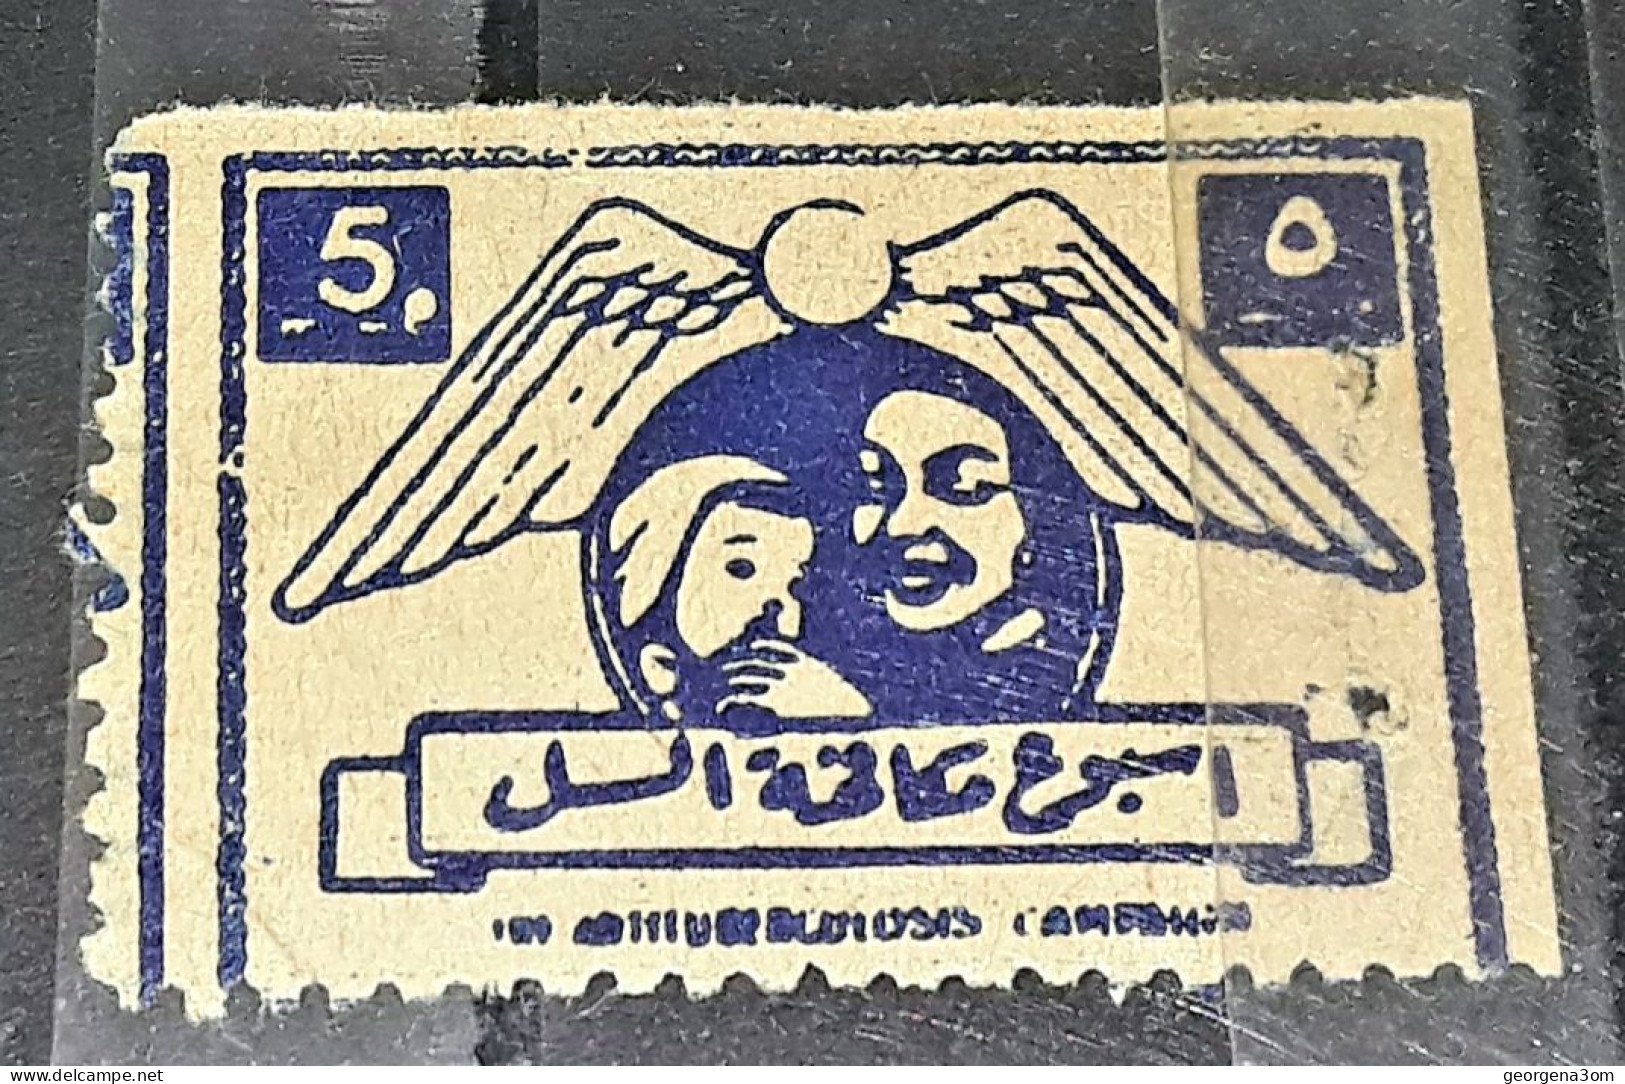 EGYPT VERY RARE OLD LABEL AGAINST TUBERCULOSIS ... VERY HARD TO FIND THIS LABEL - Etiquettes D'hotels